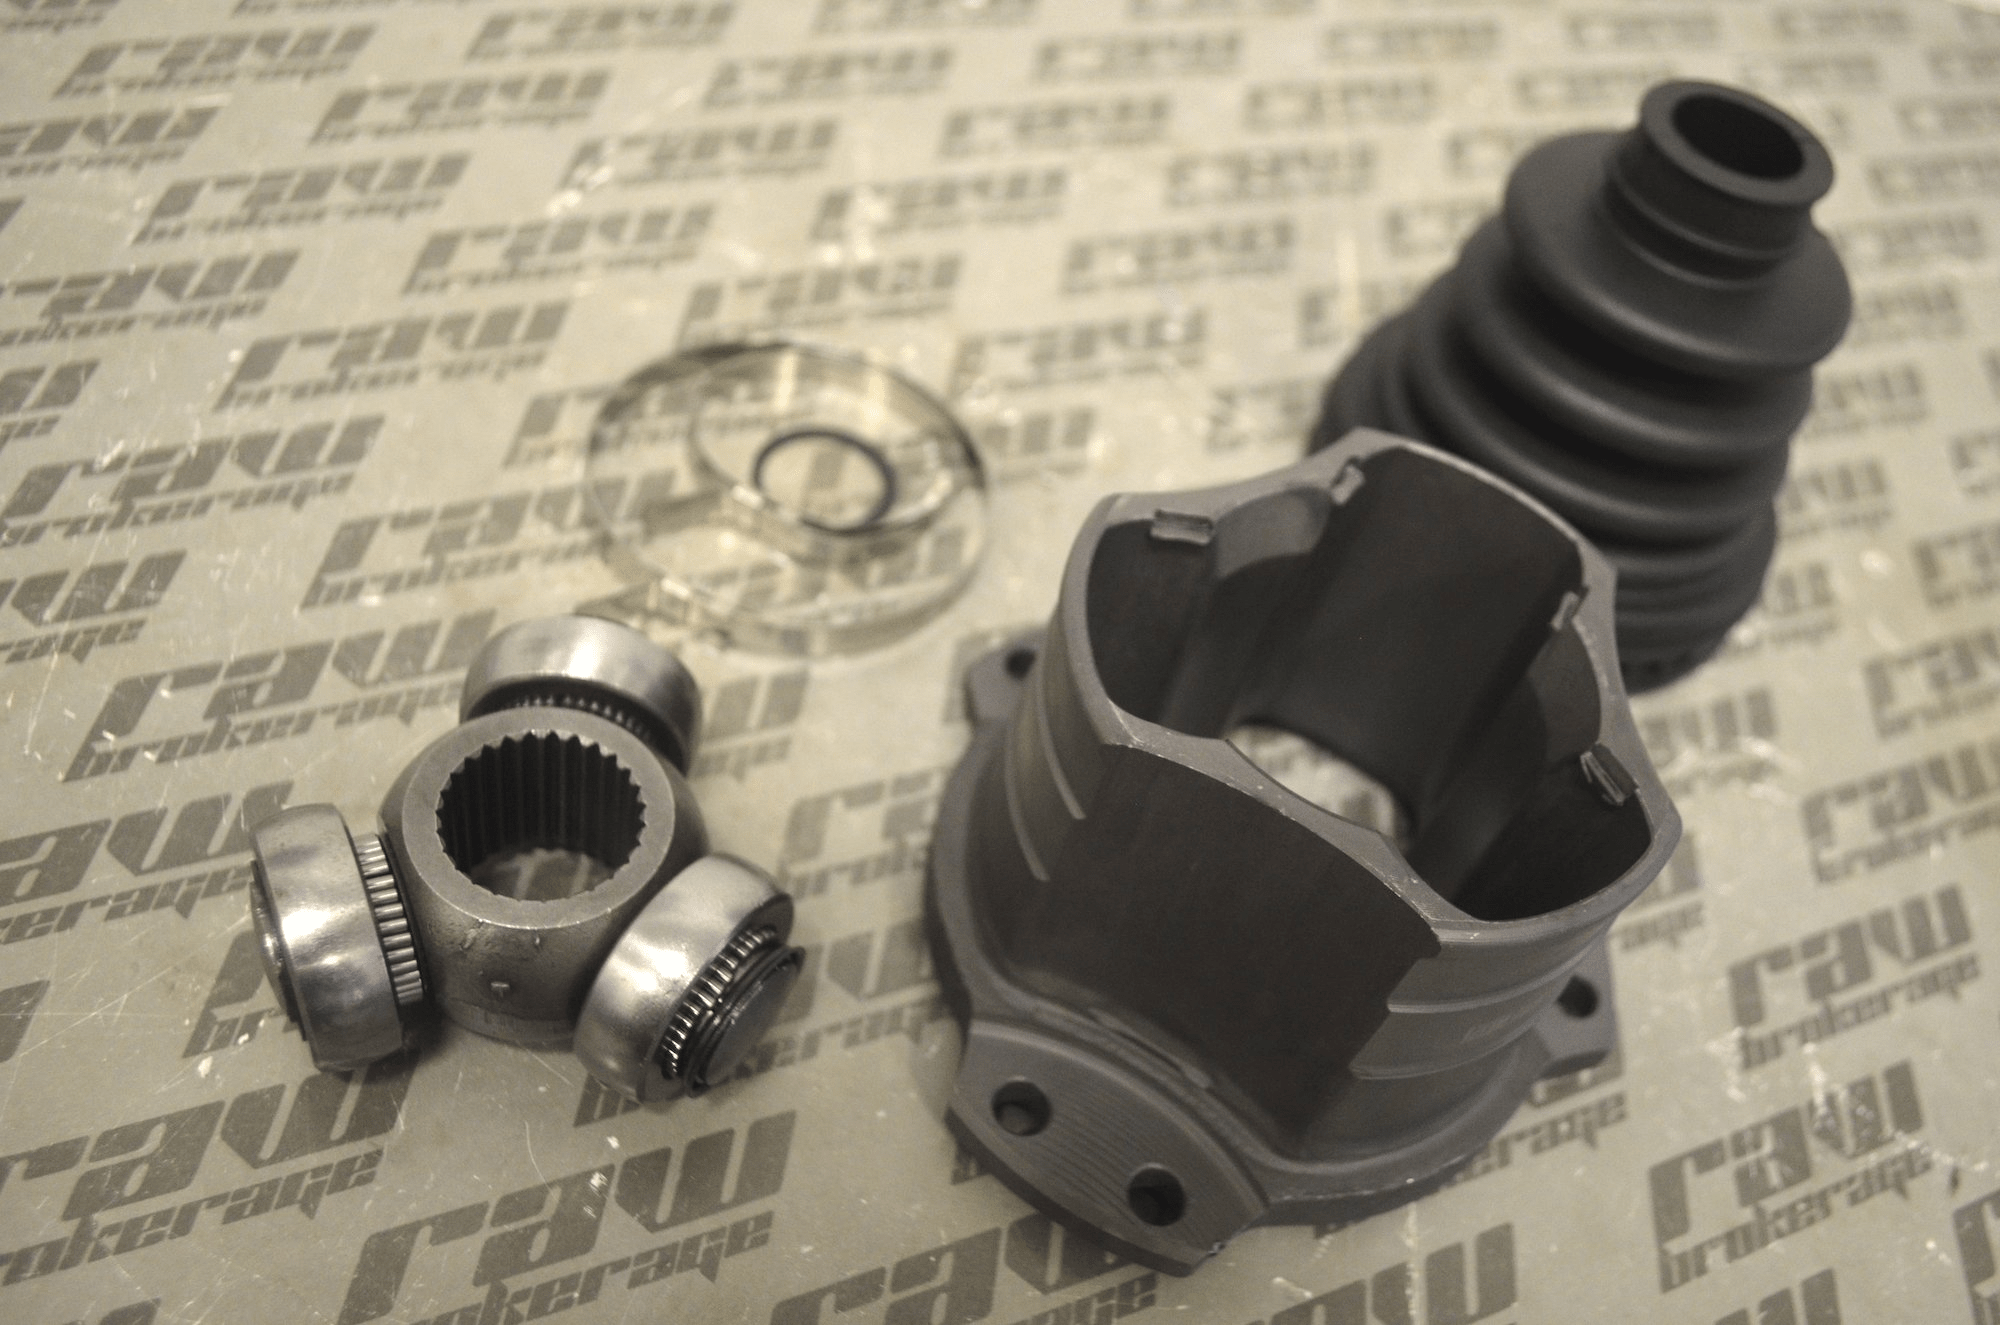 CV joint boot repair from start to finish